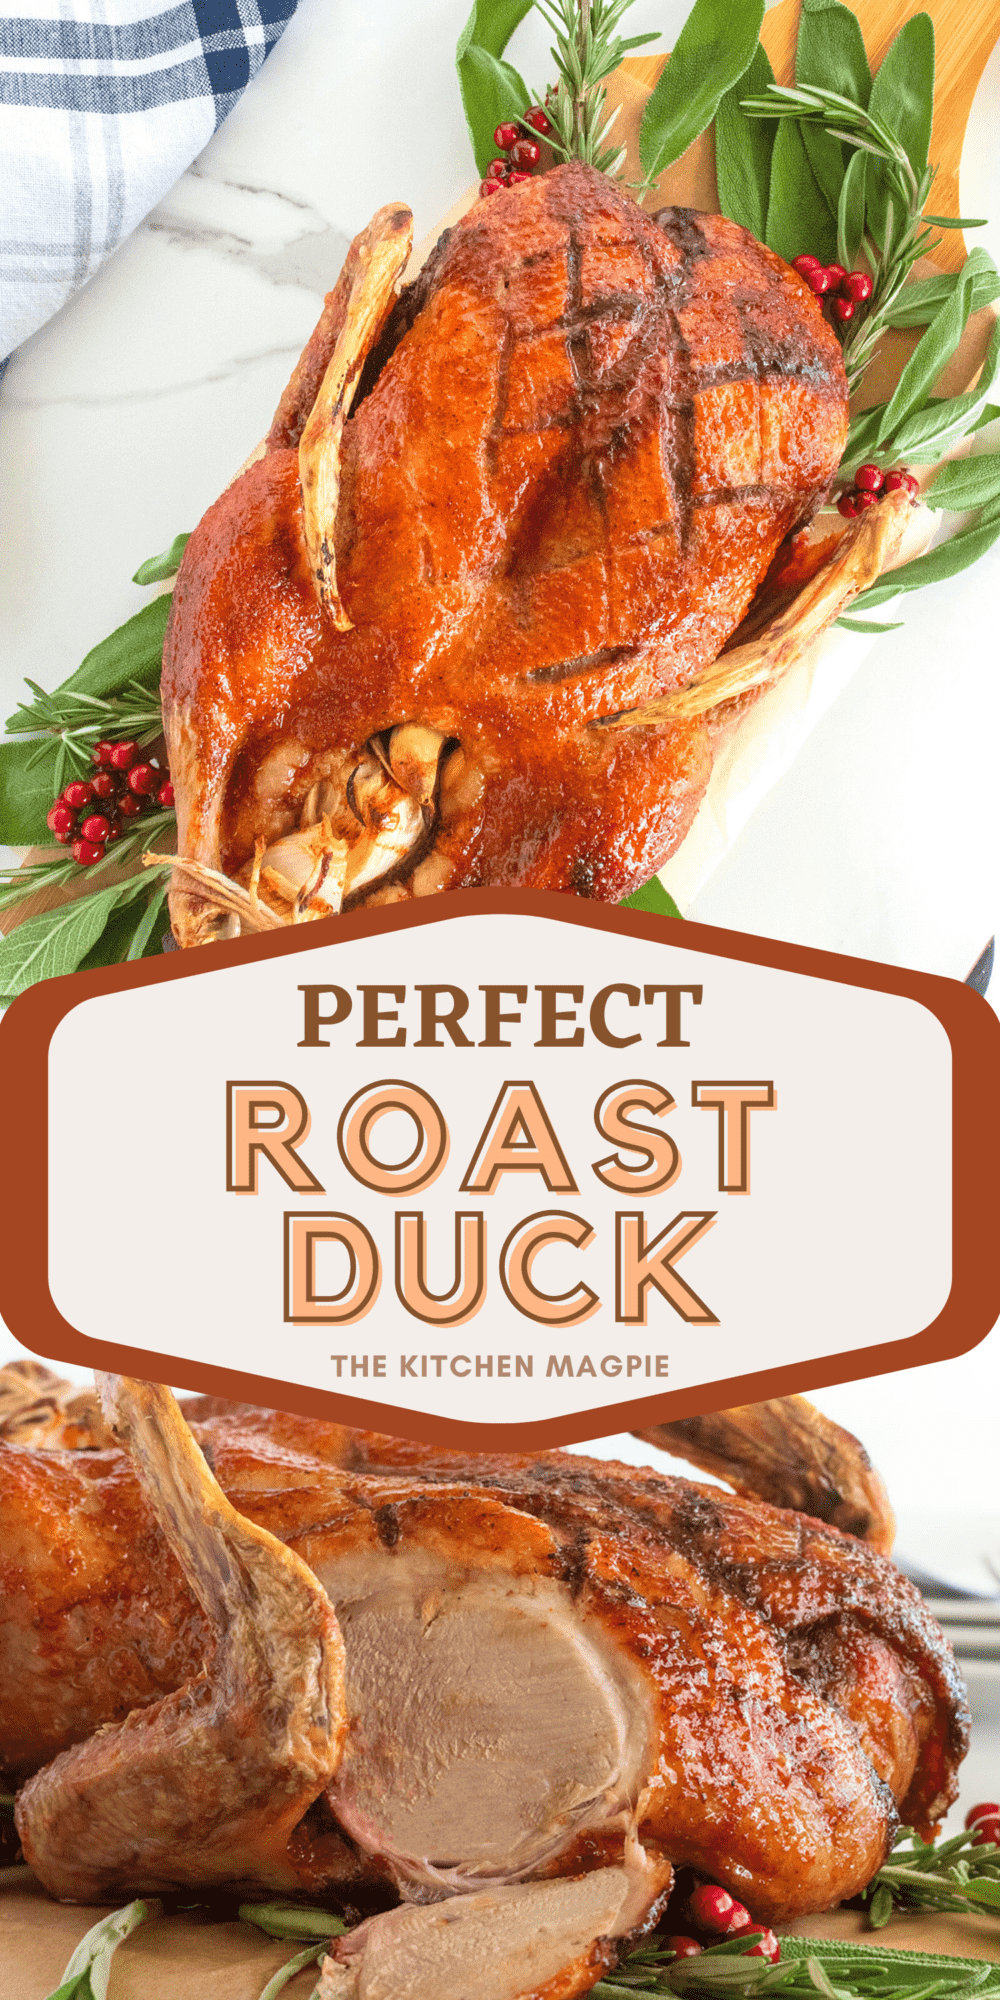 A simple spiced maple glaze, tender, juicy duck meat and perfectly roasted skin makes this roast duck recipe a new family favorite!